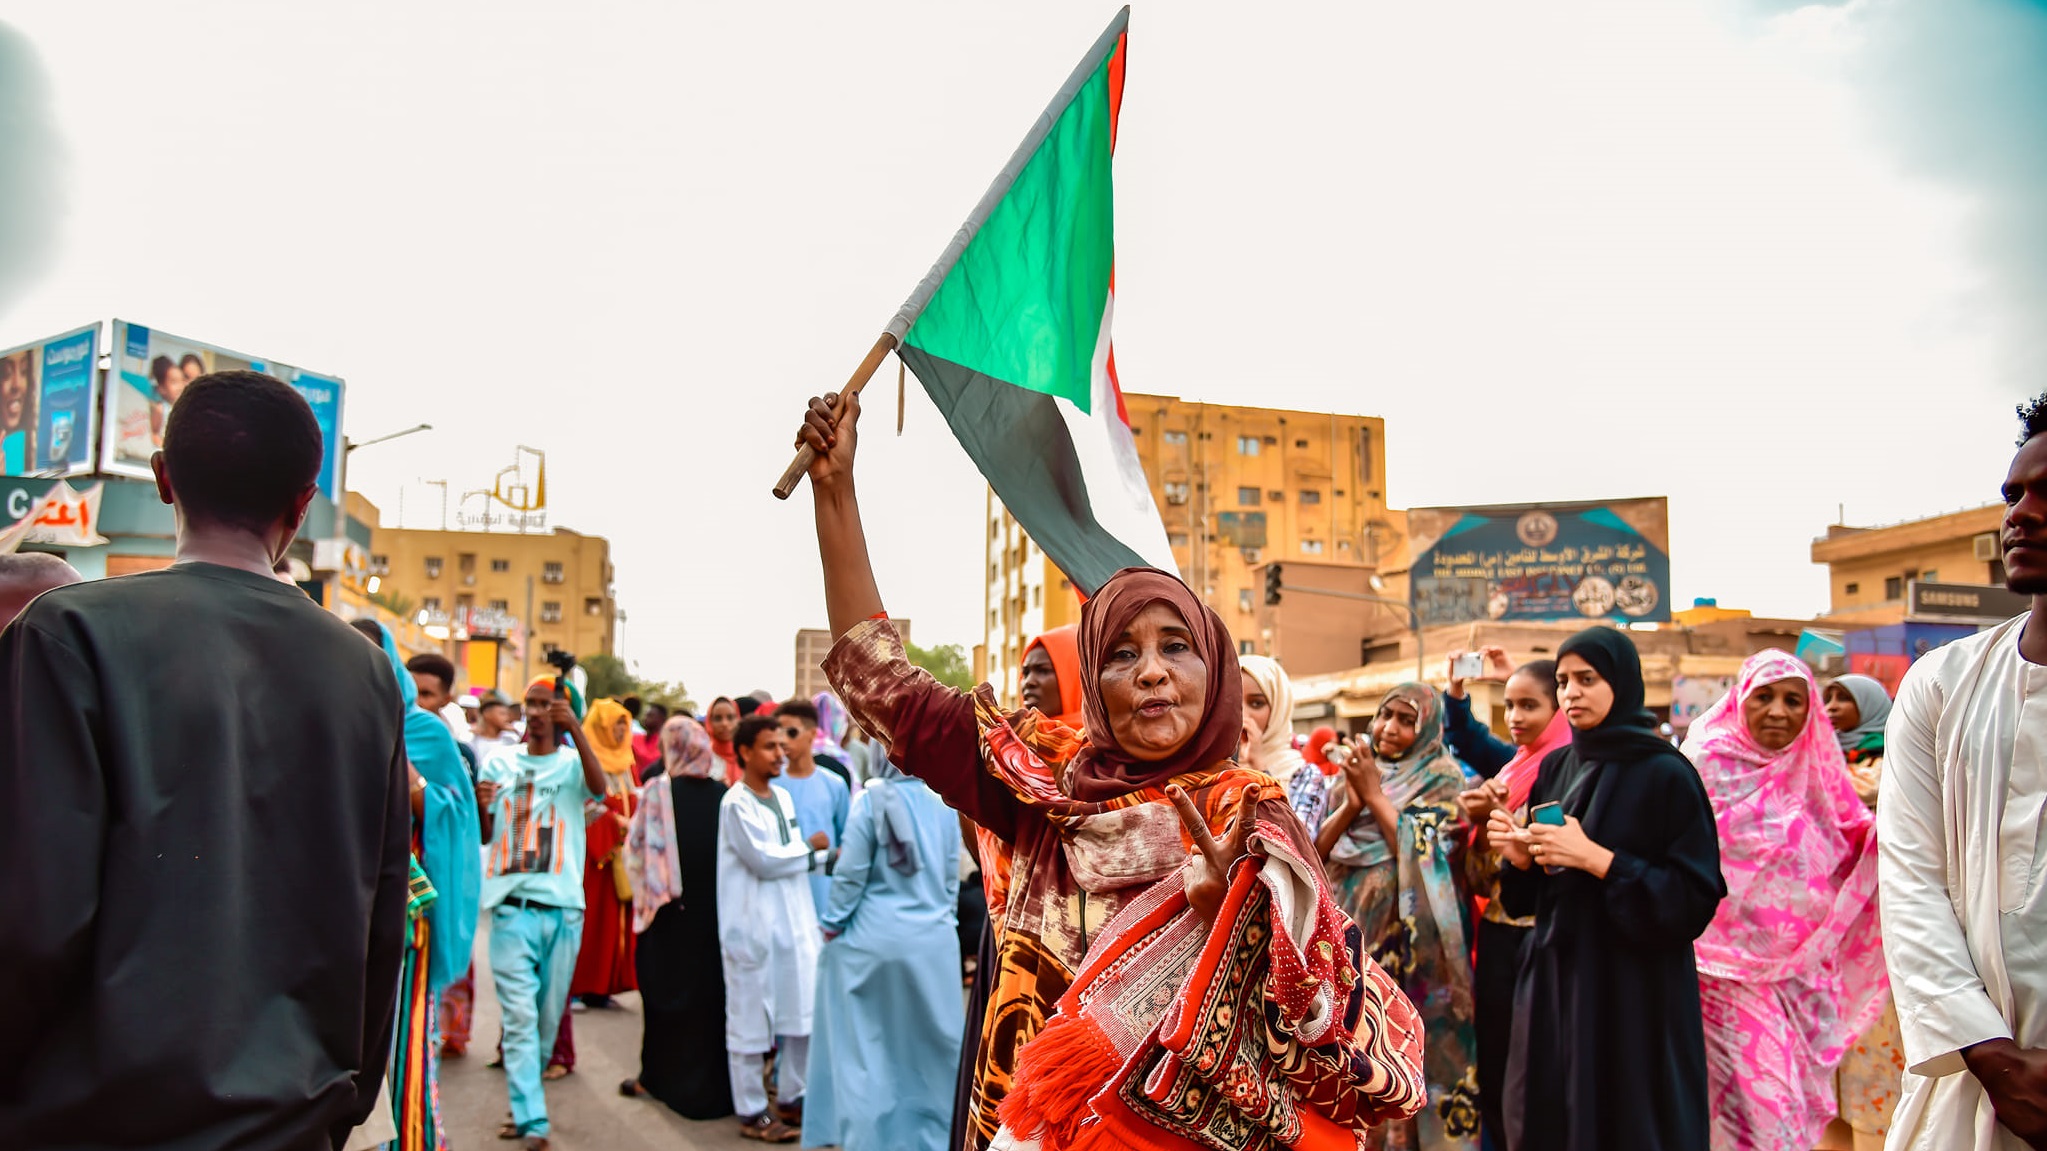 “December Revolution’s rebirth”: Sit-ins Mark New Stage of Protests Against Sudan’s Military Junta